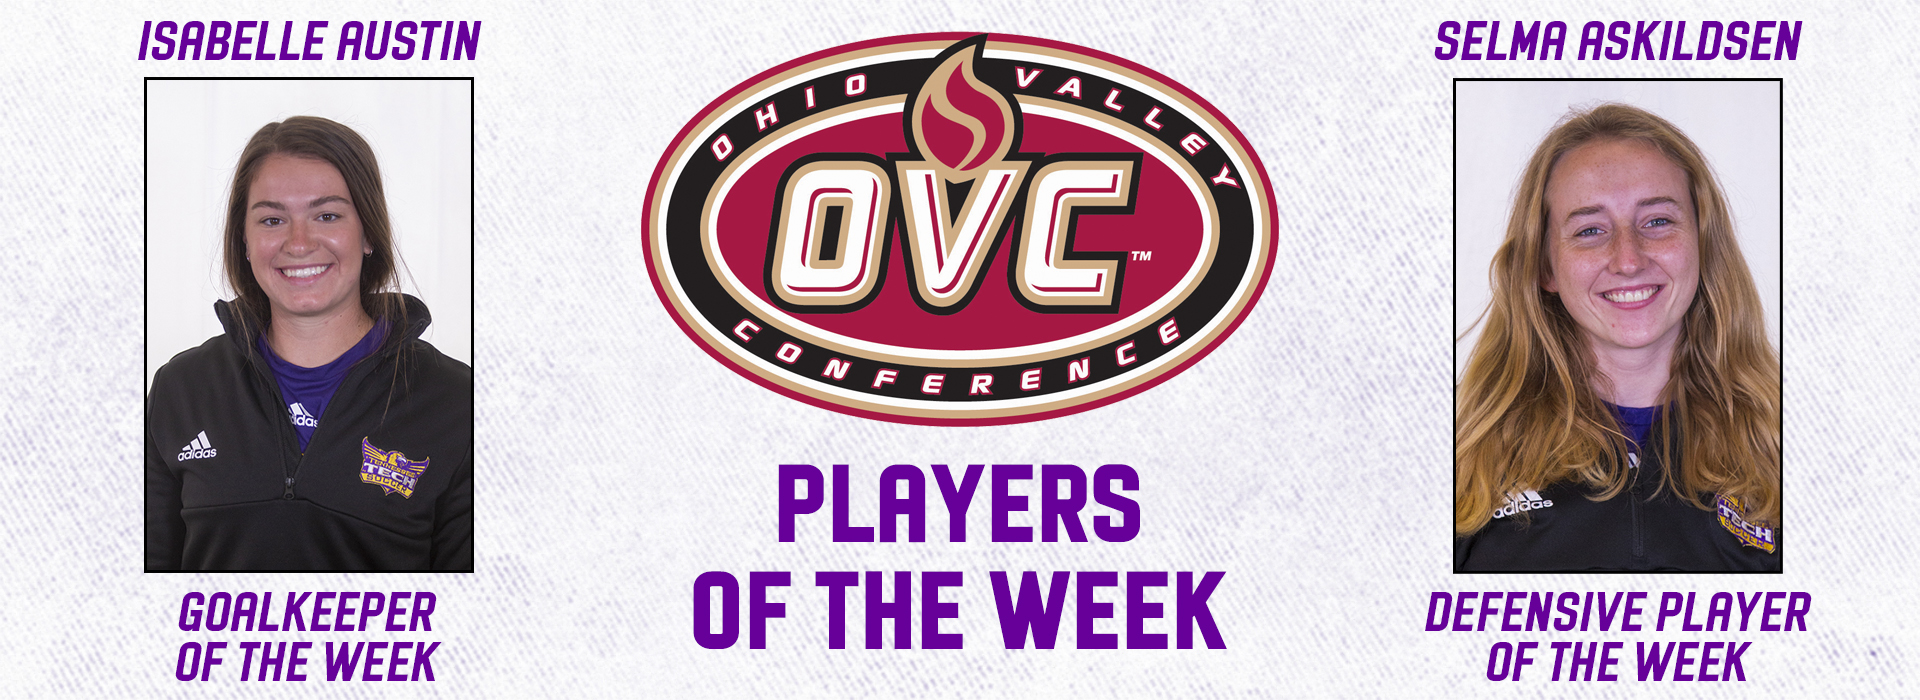 Askildsen and Austin take home OVC weekly honors